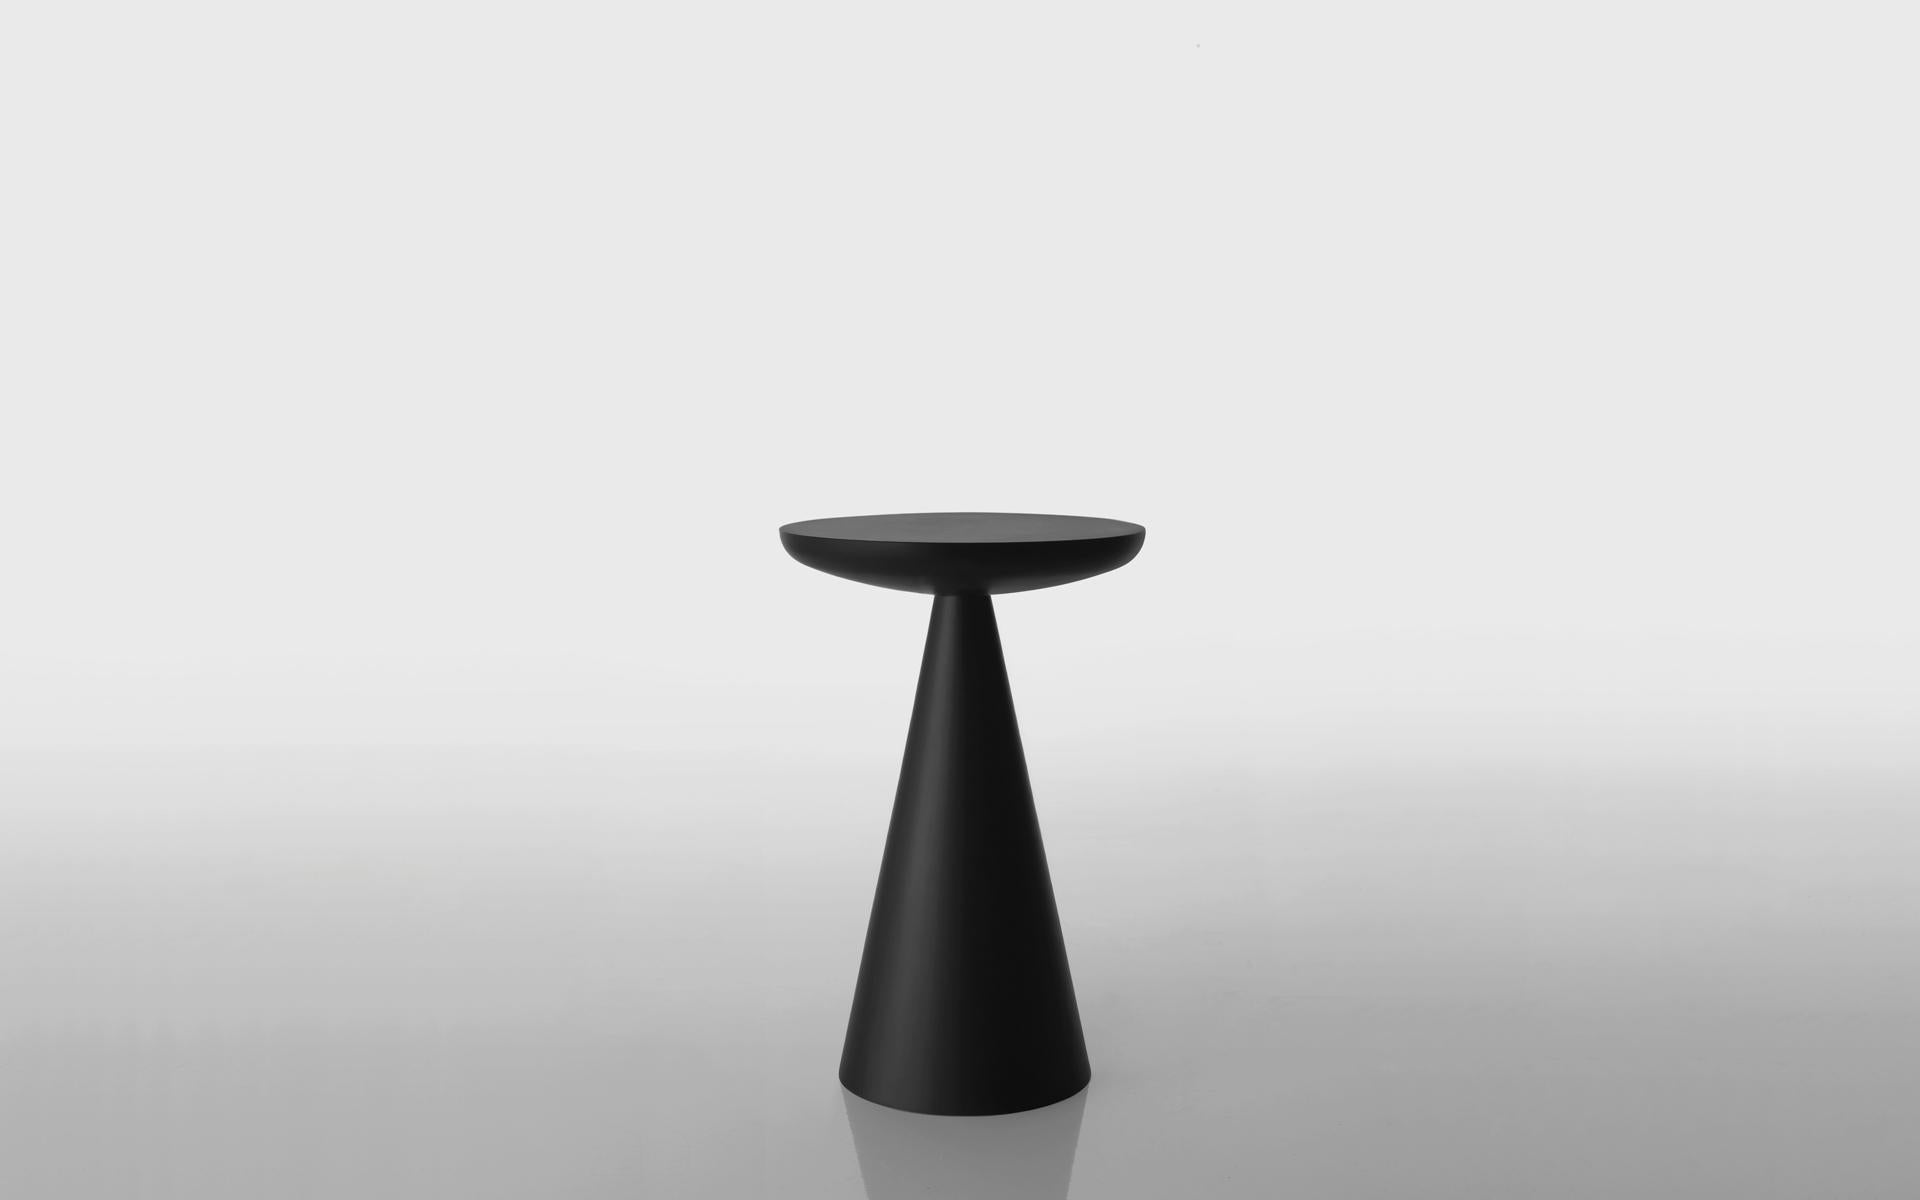 Miss table by Imperfettolab
Dimensions: Ø 32 x H 56.5 cm
Materials: Fiberglass

Imperfetto Lab
Who we are ? We are a family.
Verter Turroni, Emanuela Ravelli and our children Elia, Margherita and Eusebio.
All together, we are separate parts